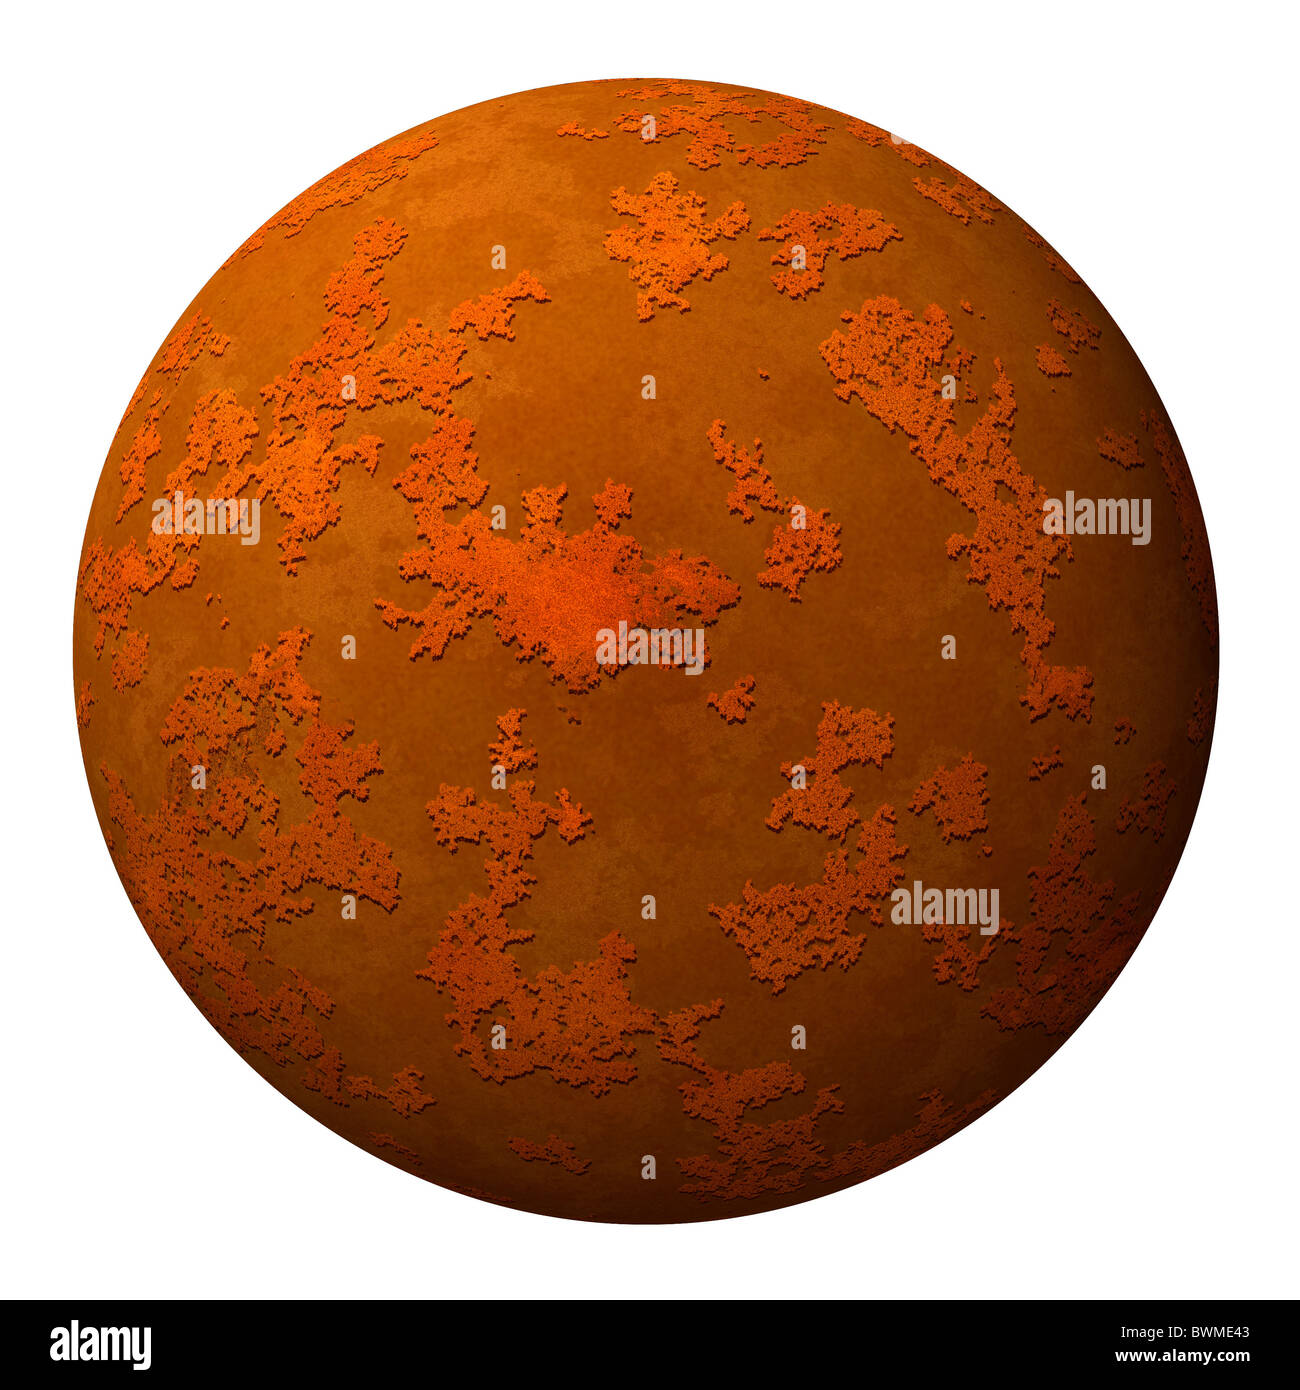 Sphere ball or planet with a rusty iron metal textured surface against white background Stock Photo